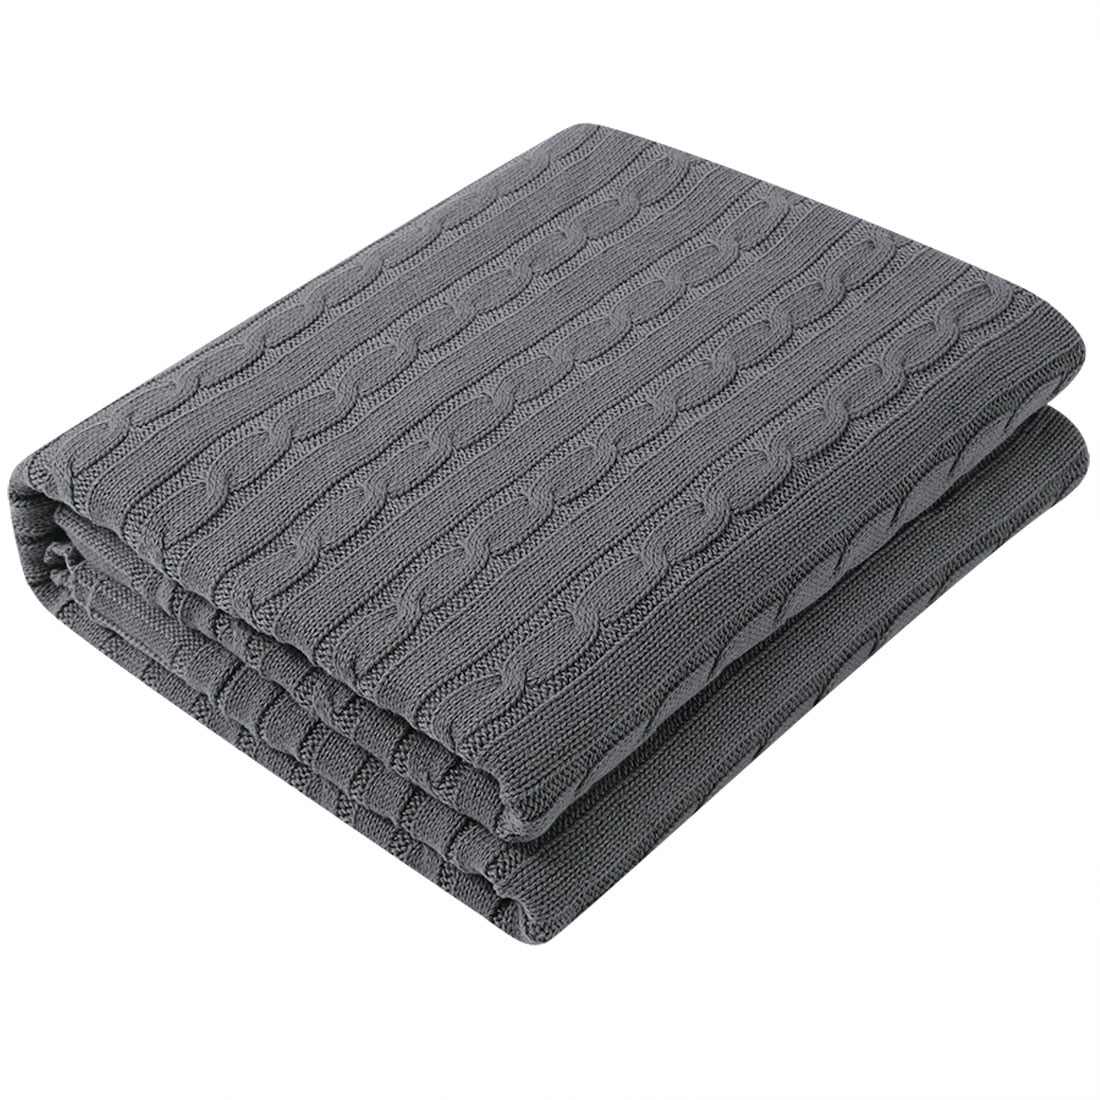 Unique Bargains Weighted Cotton Blanket Soft Warm Cable Knit Throw Home